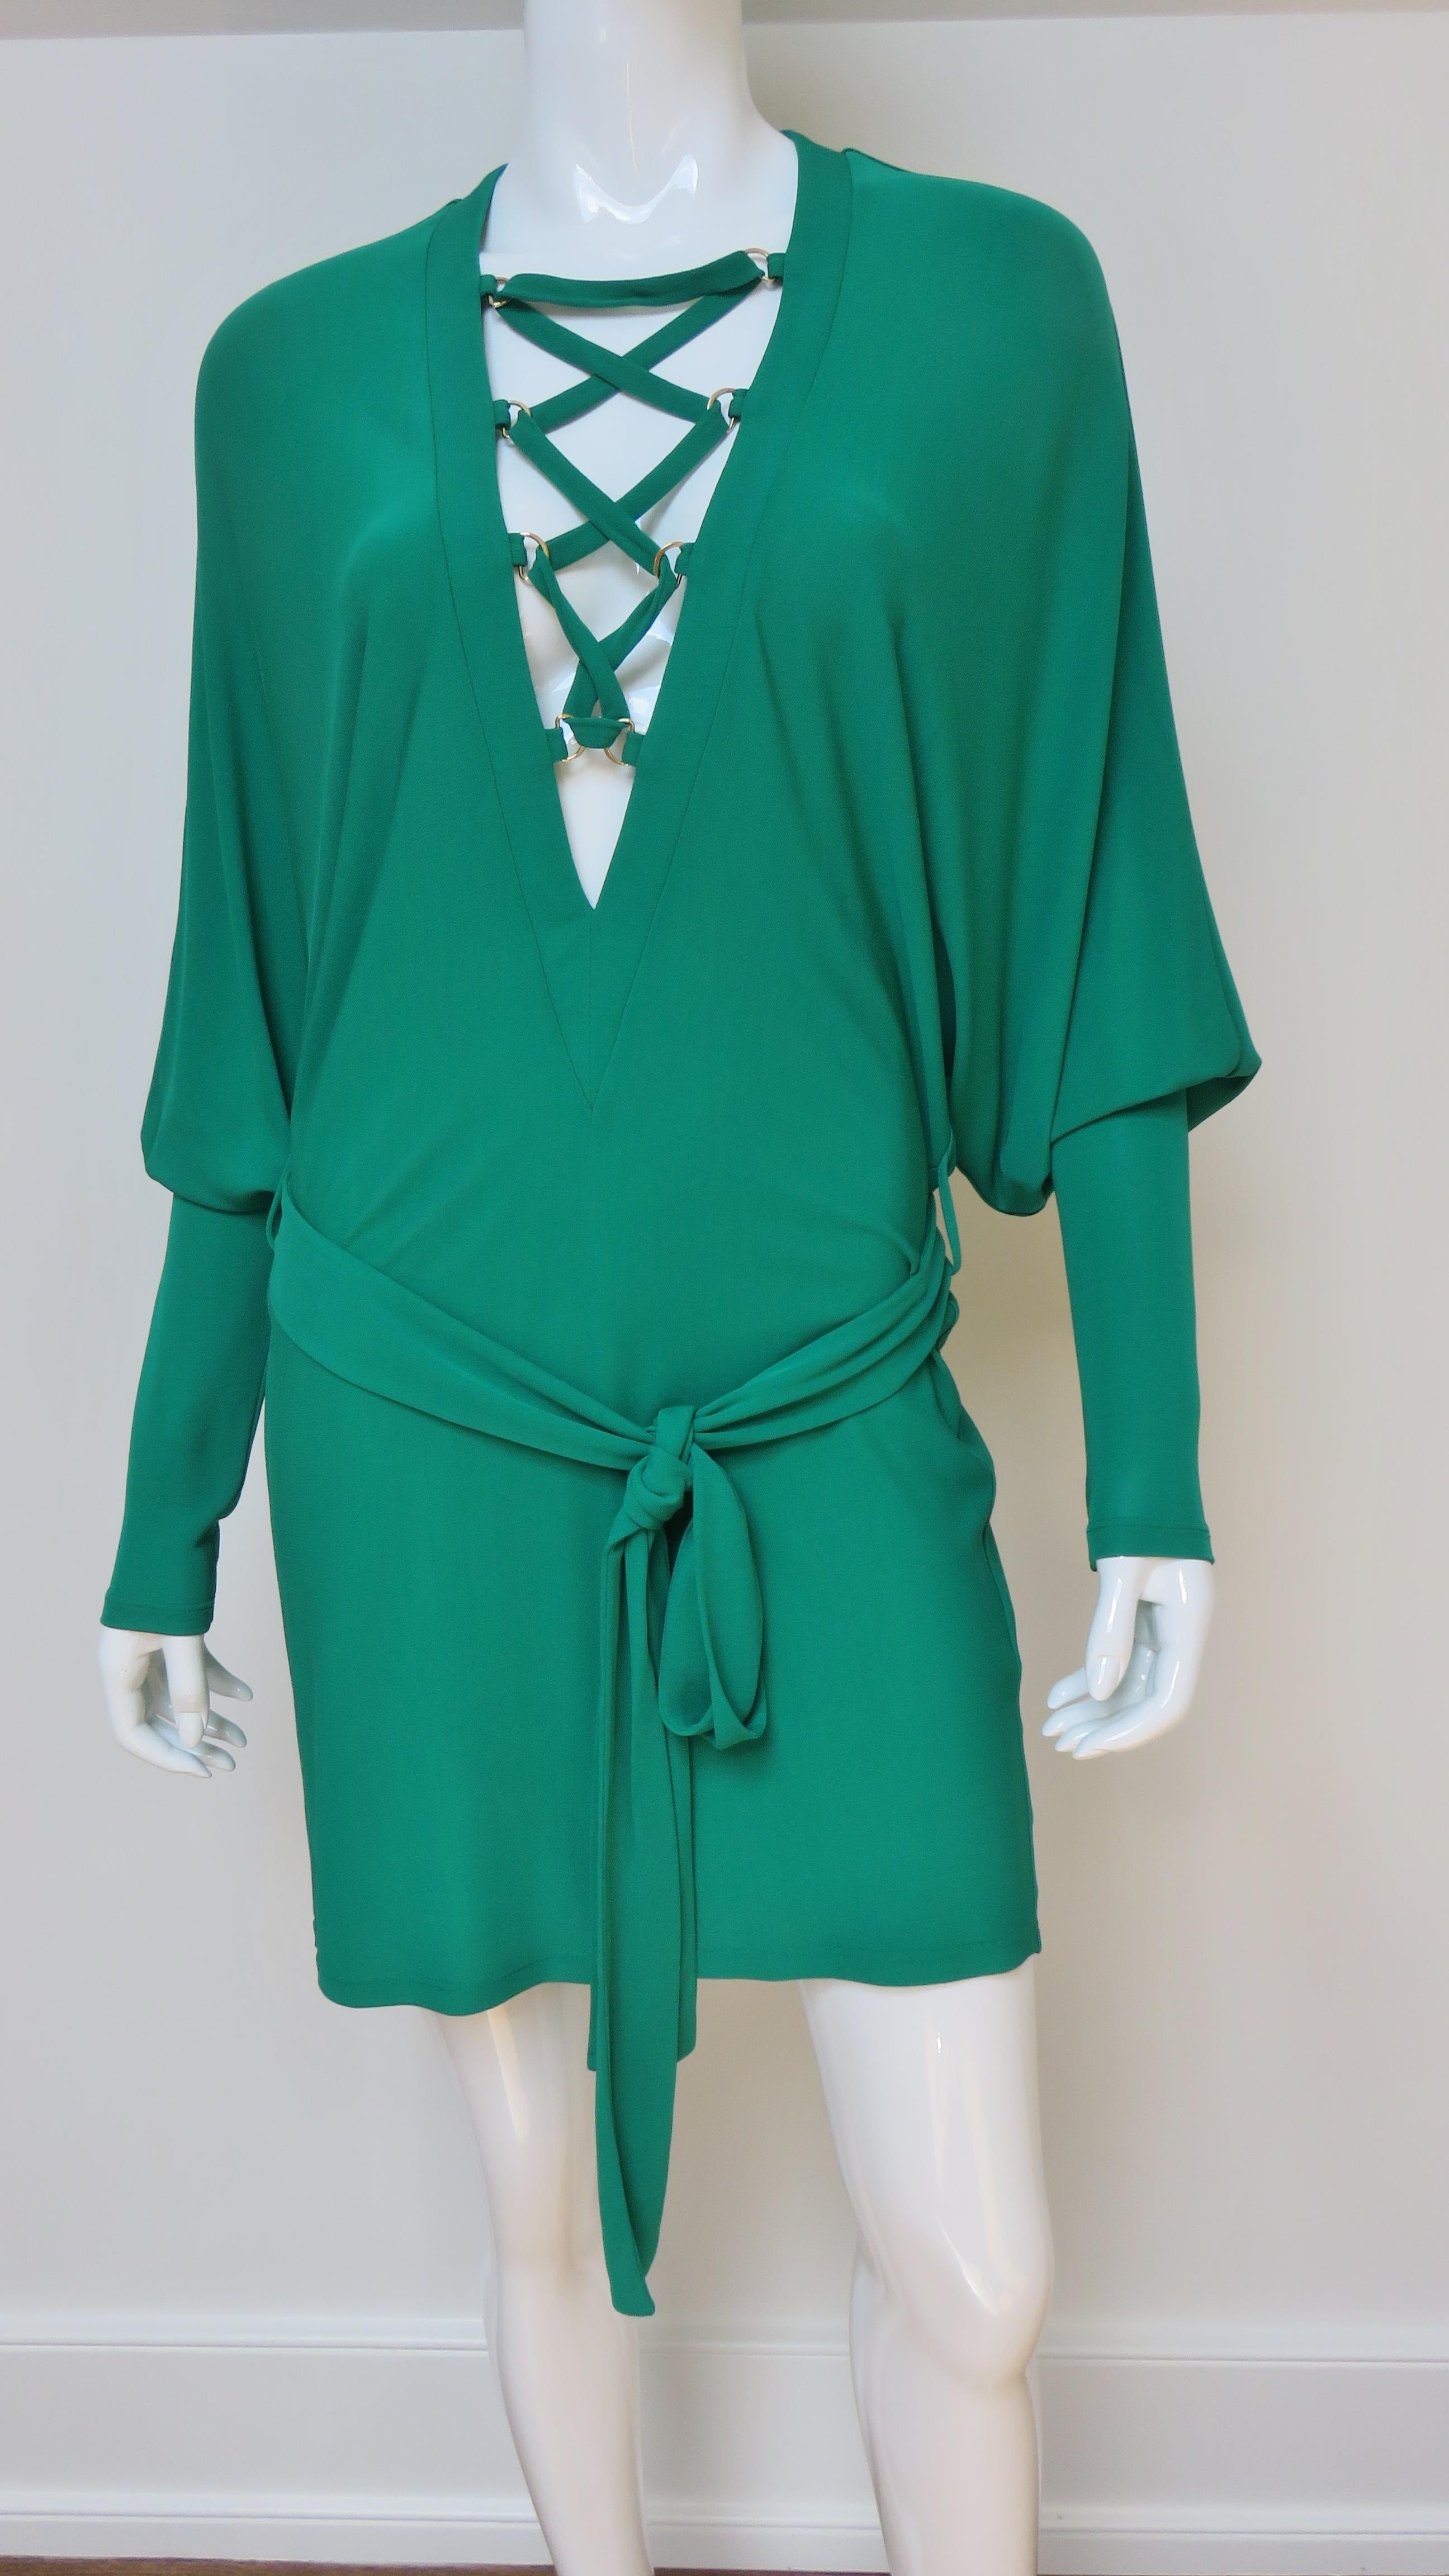 A fabulous emerald green jersey dress from Pierre Balmain.  It has a deep V front neckline with lacing detail, dolman sleeves with wide cuffs and a matching tie belt.  It drapes beautifully on the body and slips on over the head.
Fits sizes Small,